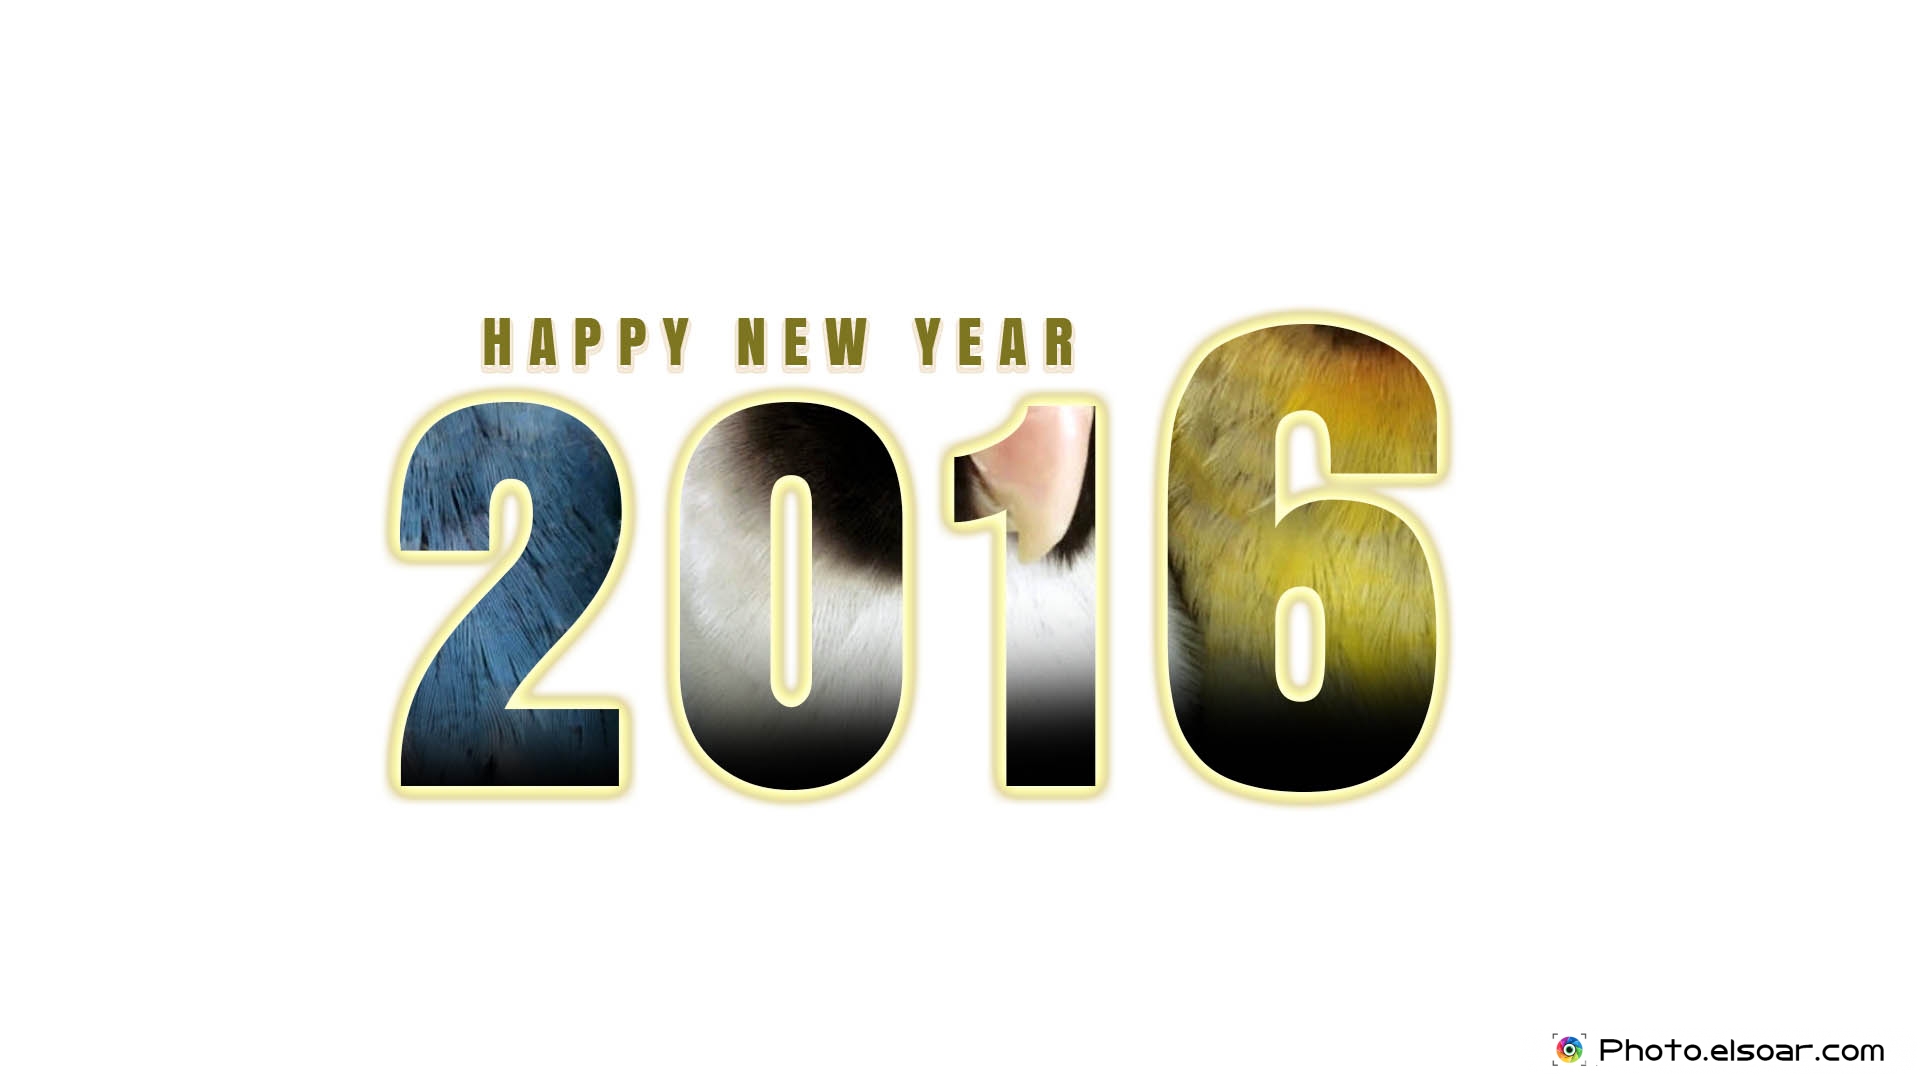 Happy New Year 2016 Images Wallpapers And Greeting Cards 1920x1080